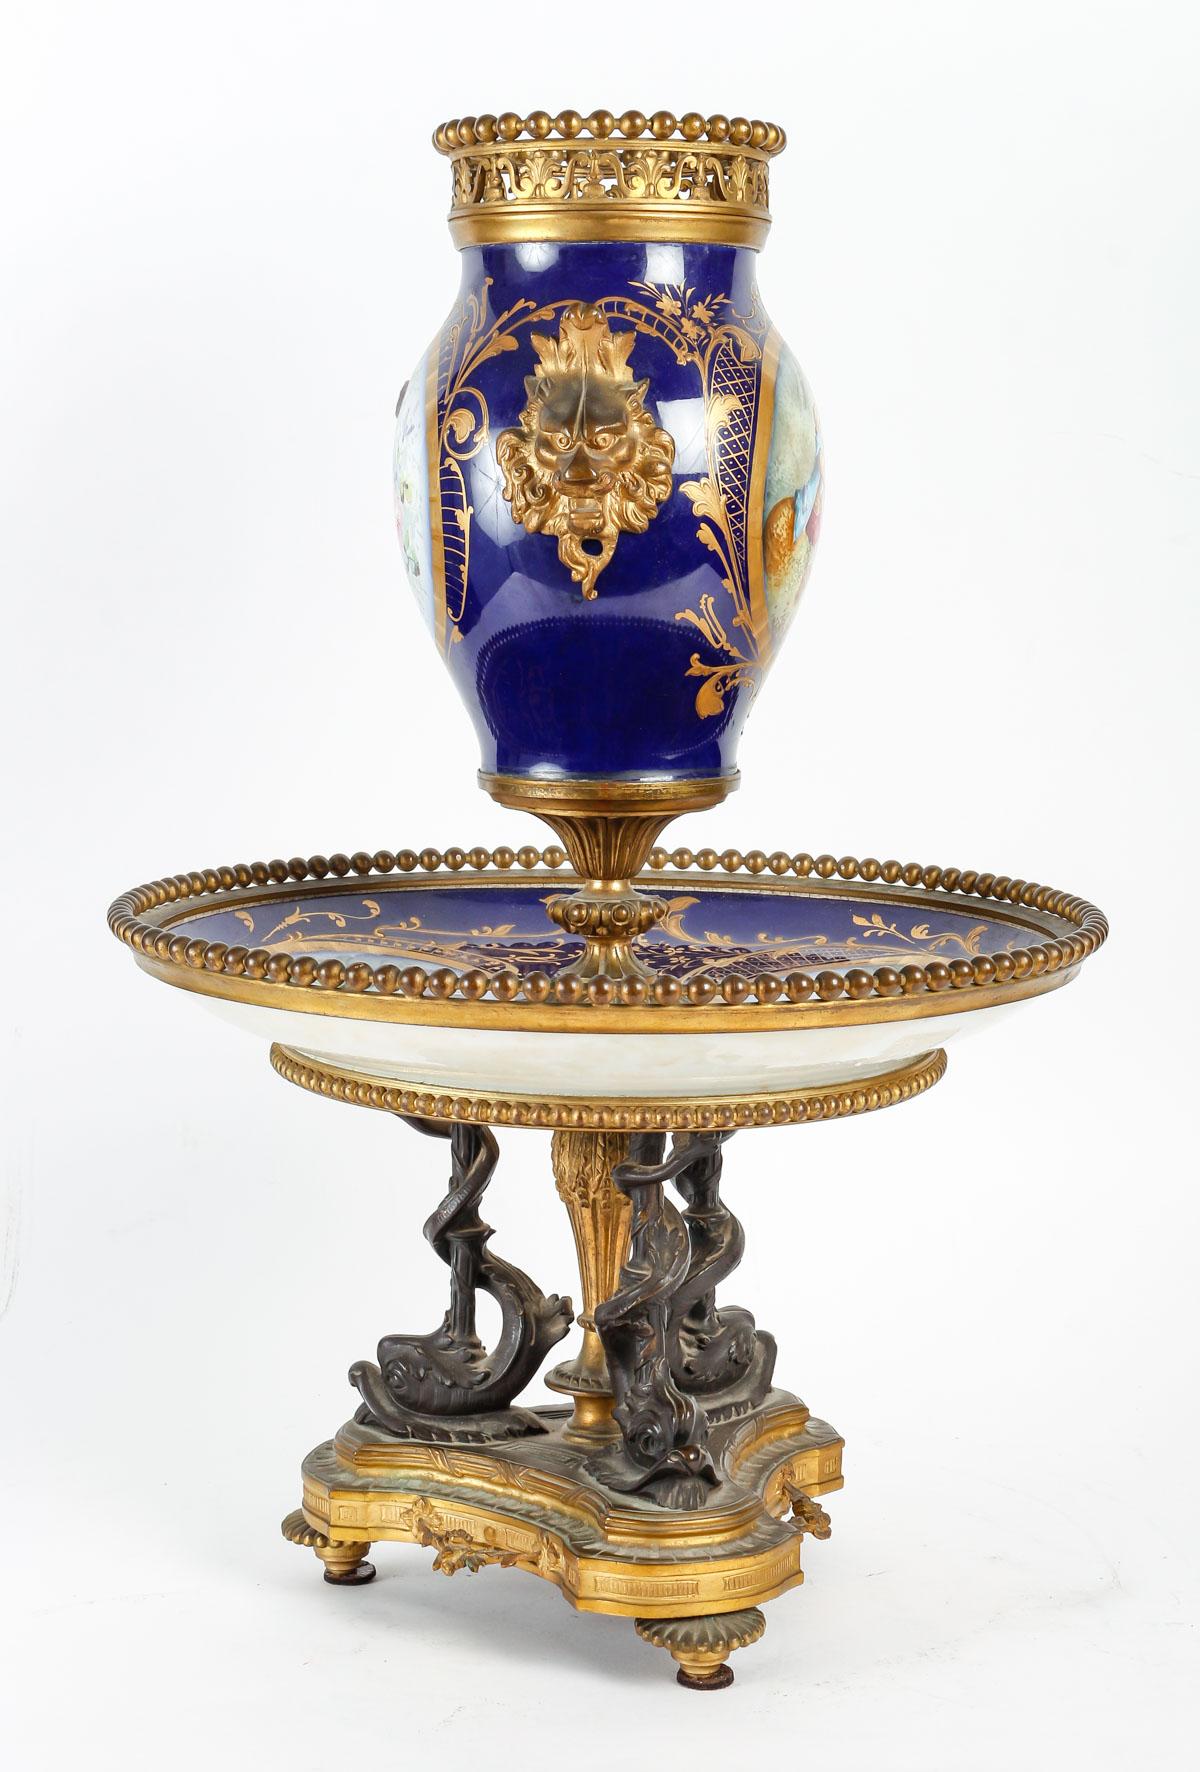 A 19th Century French  Napoléon III Surtout de Table

French 19th Century Hand-Painted Porcelain and Ormolu-Mounted Surtout De Table
Composed of two parts, a tray forming display in the lower part, a vase in the upper part, fixed and mounted in the